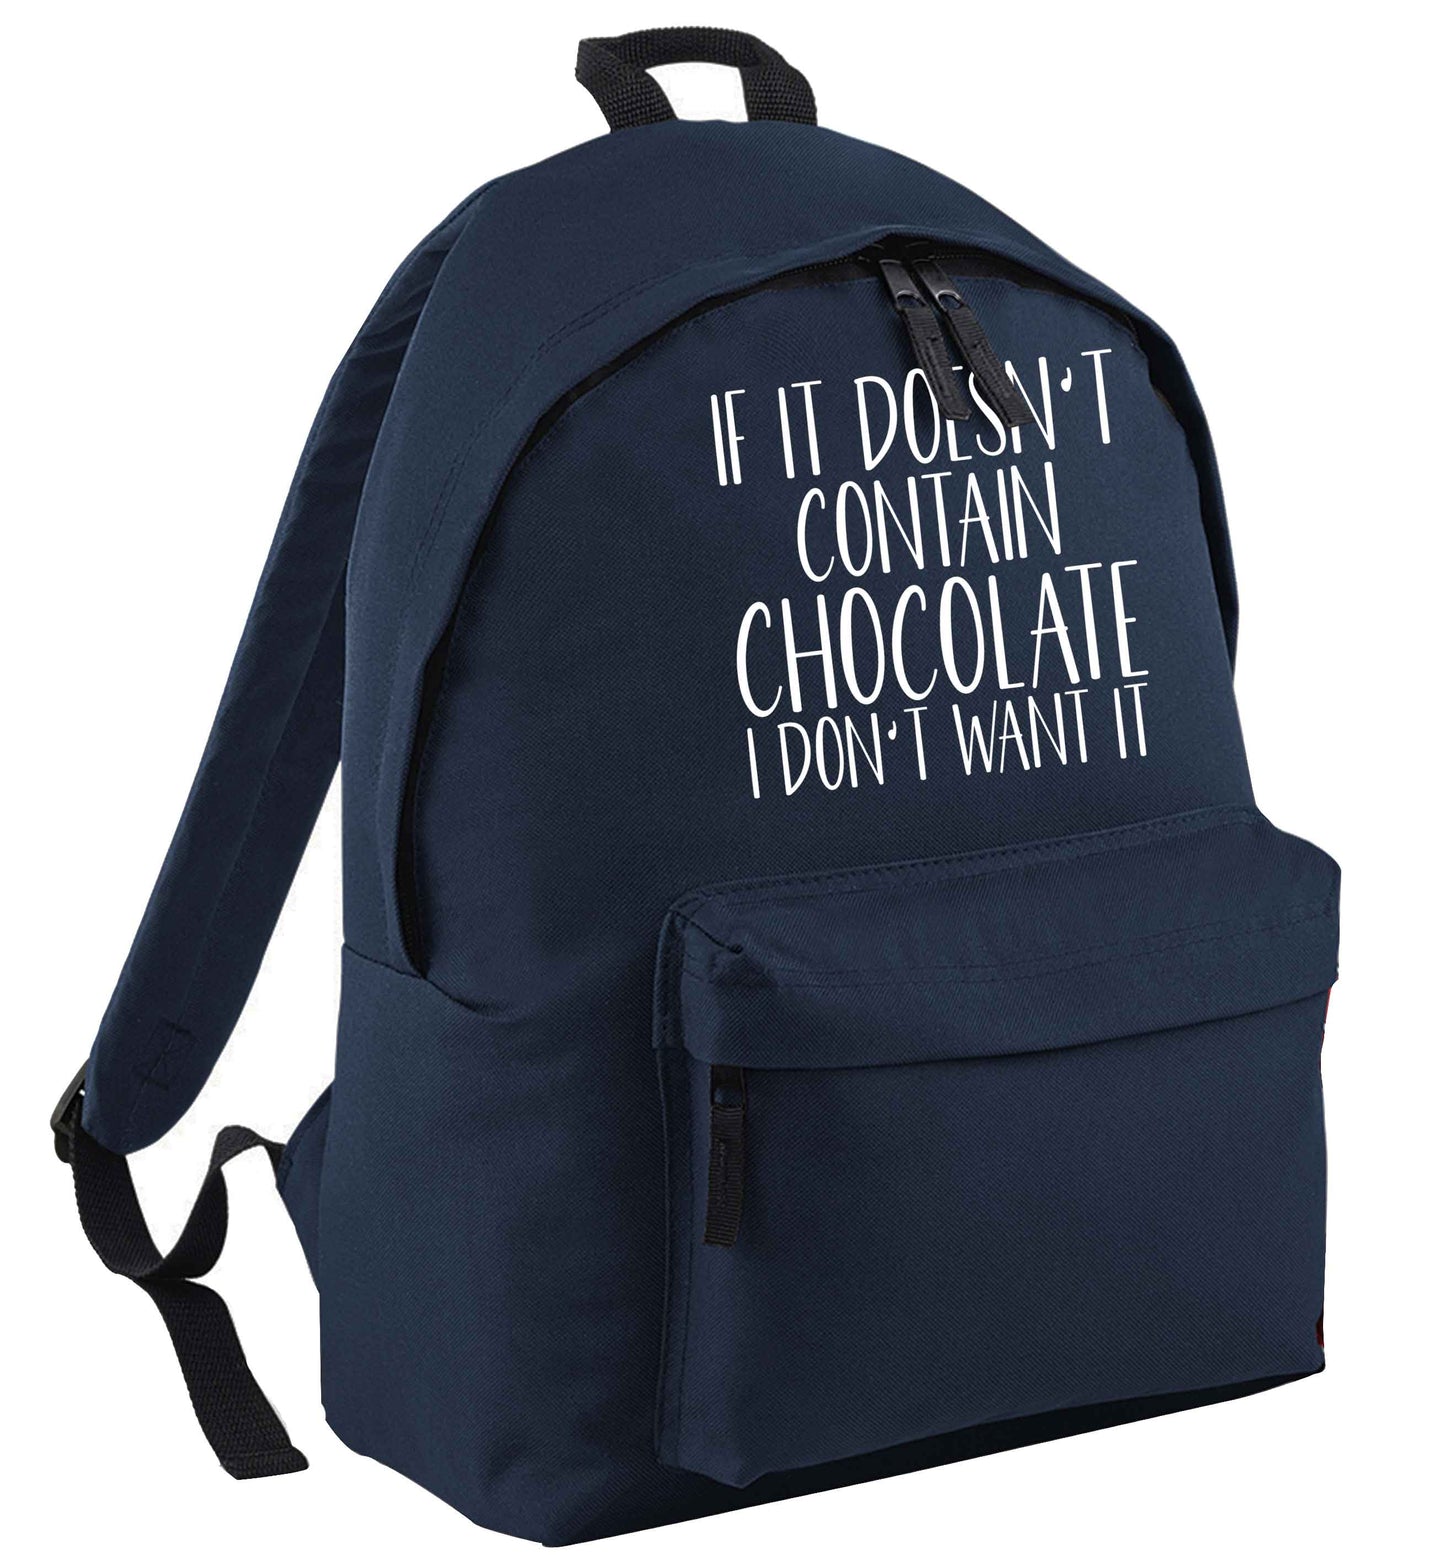 If it doesn't contain chocolate I don't want it navy adults backpack